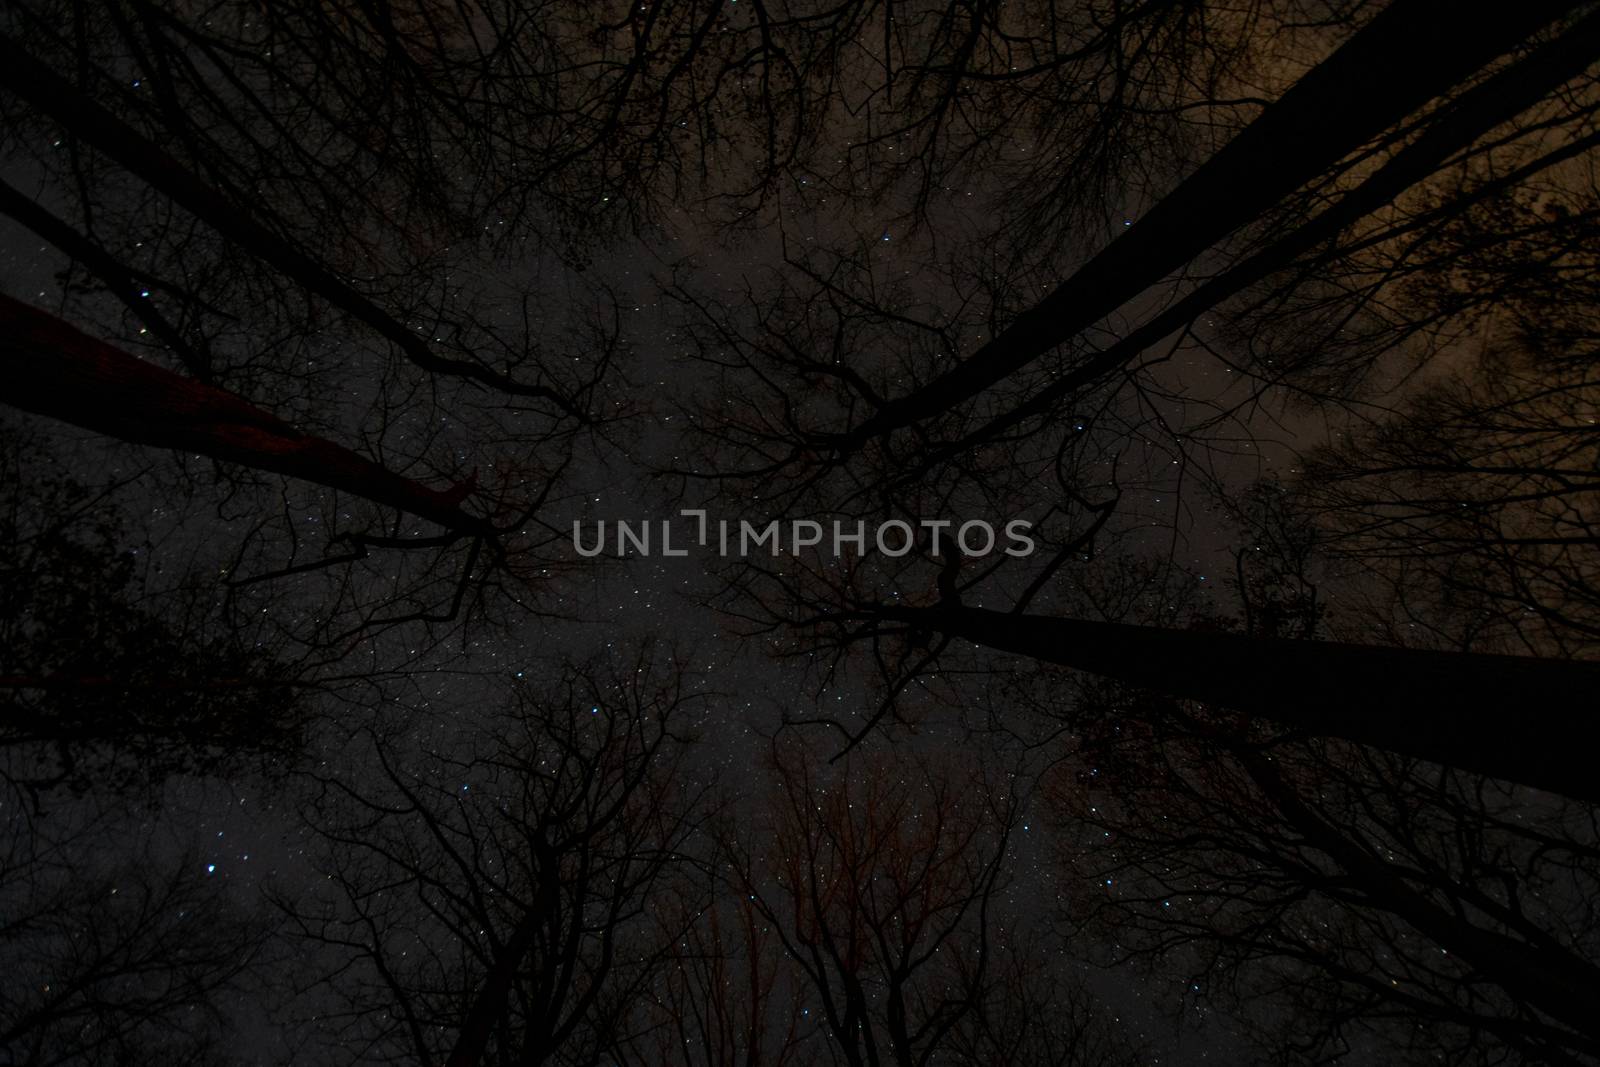 Looking Up Through Scary Silhouetted Trees at a Night Sky Full of Stars